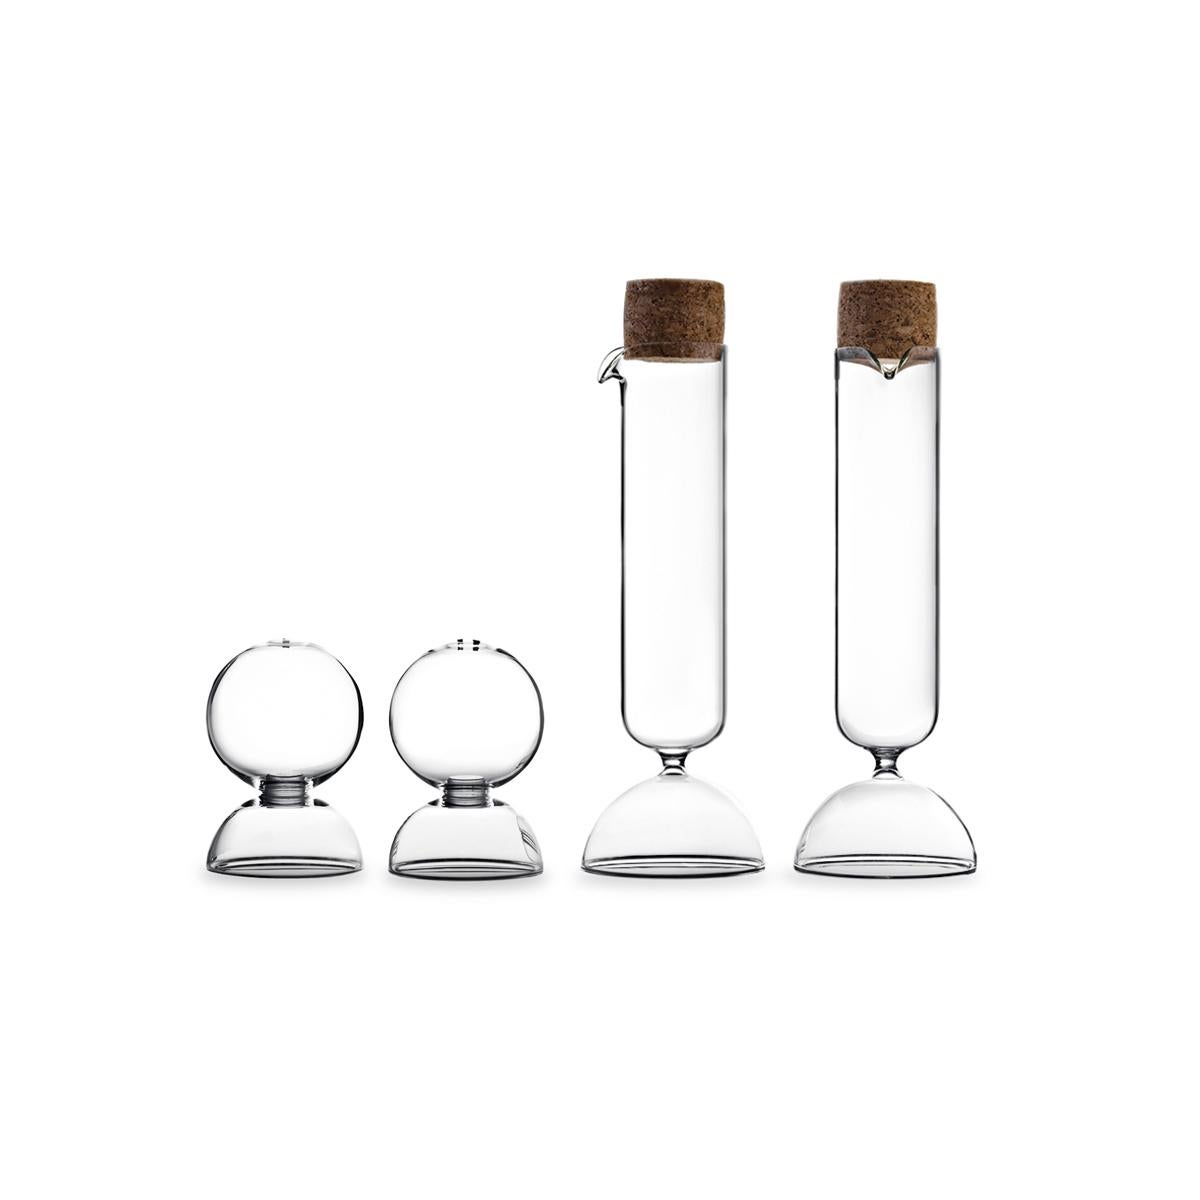 Bubble, designed by Gordon Guillaumier, is a salt and pepper Shaker set made in transparent blown glass. In the same family there is the oil and vinegar dispenser set available on 1stdibs as well.